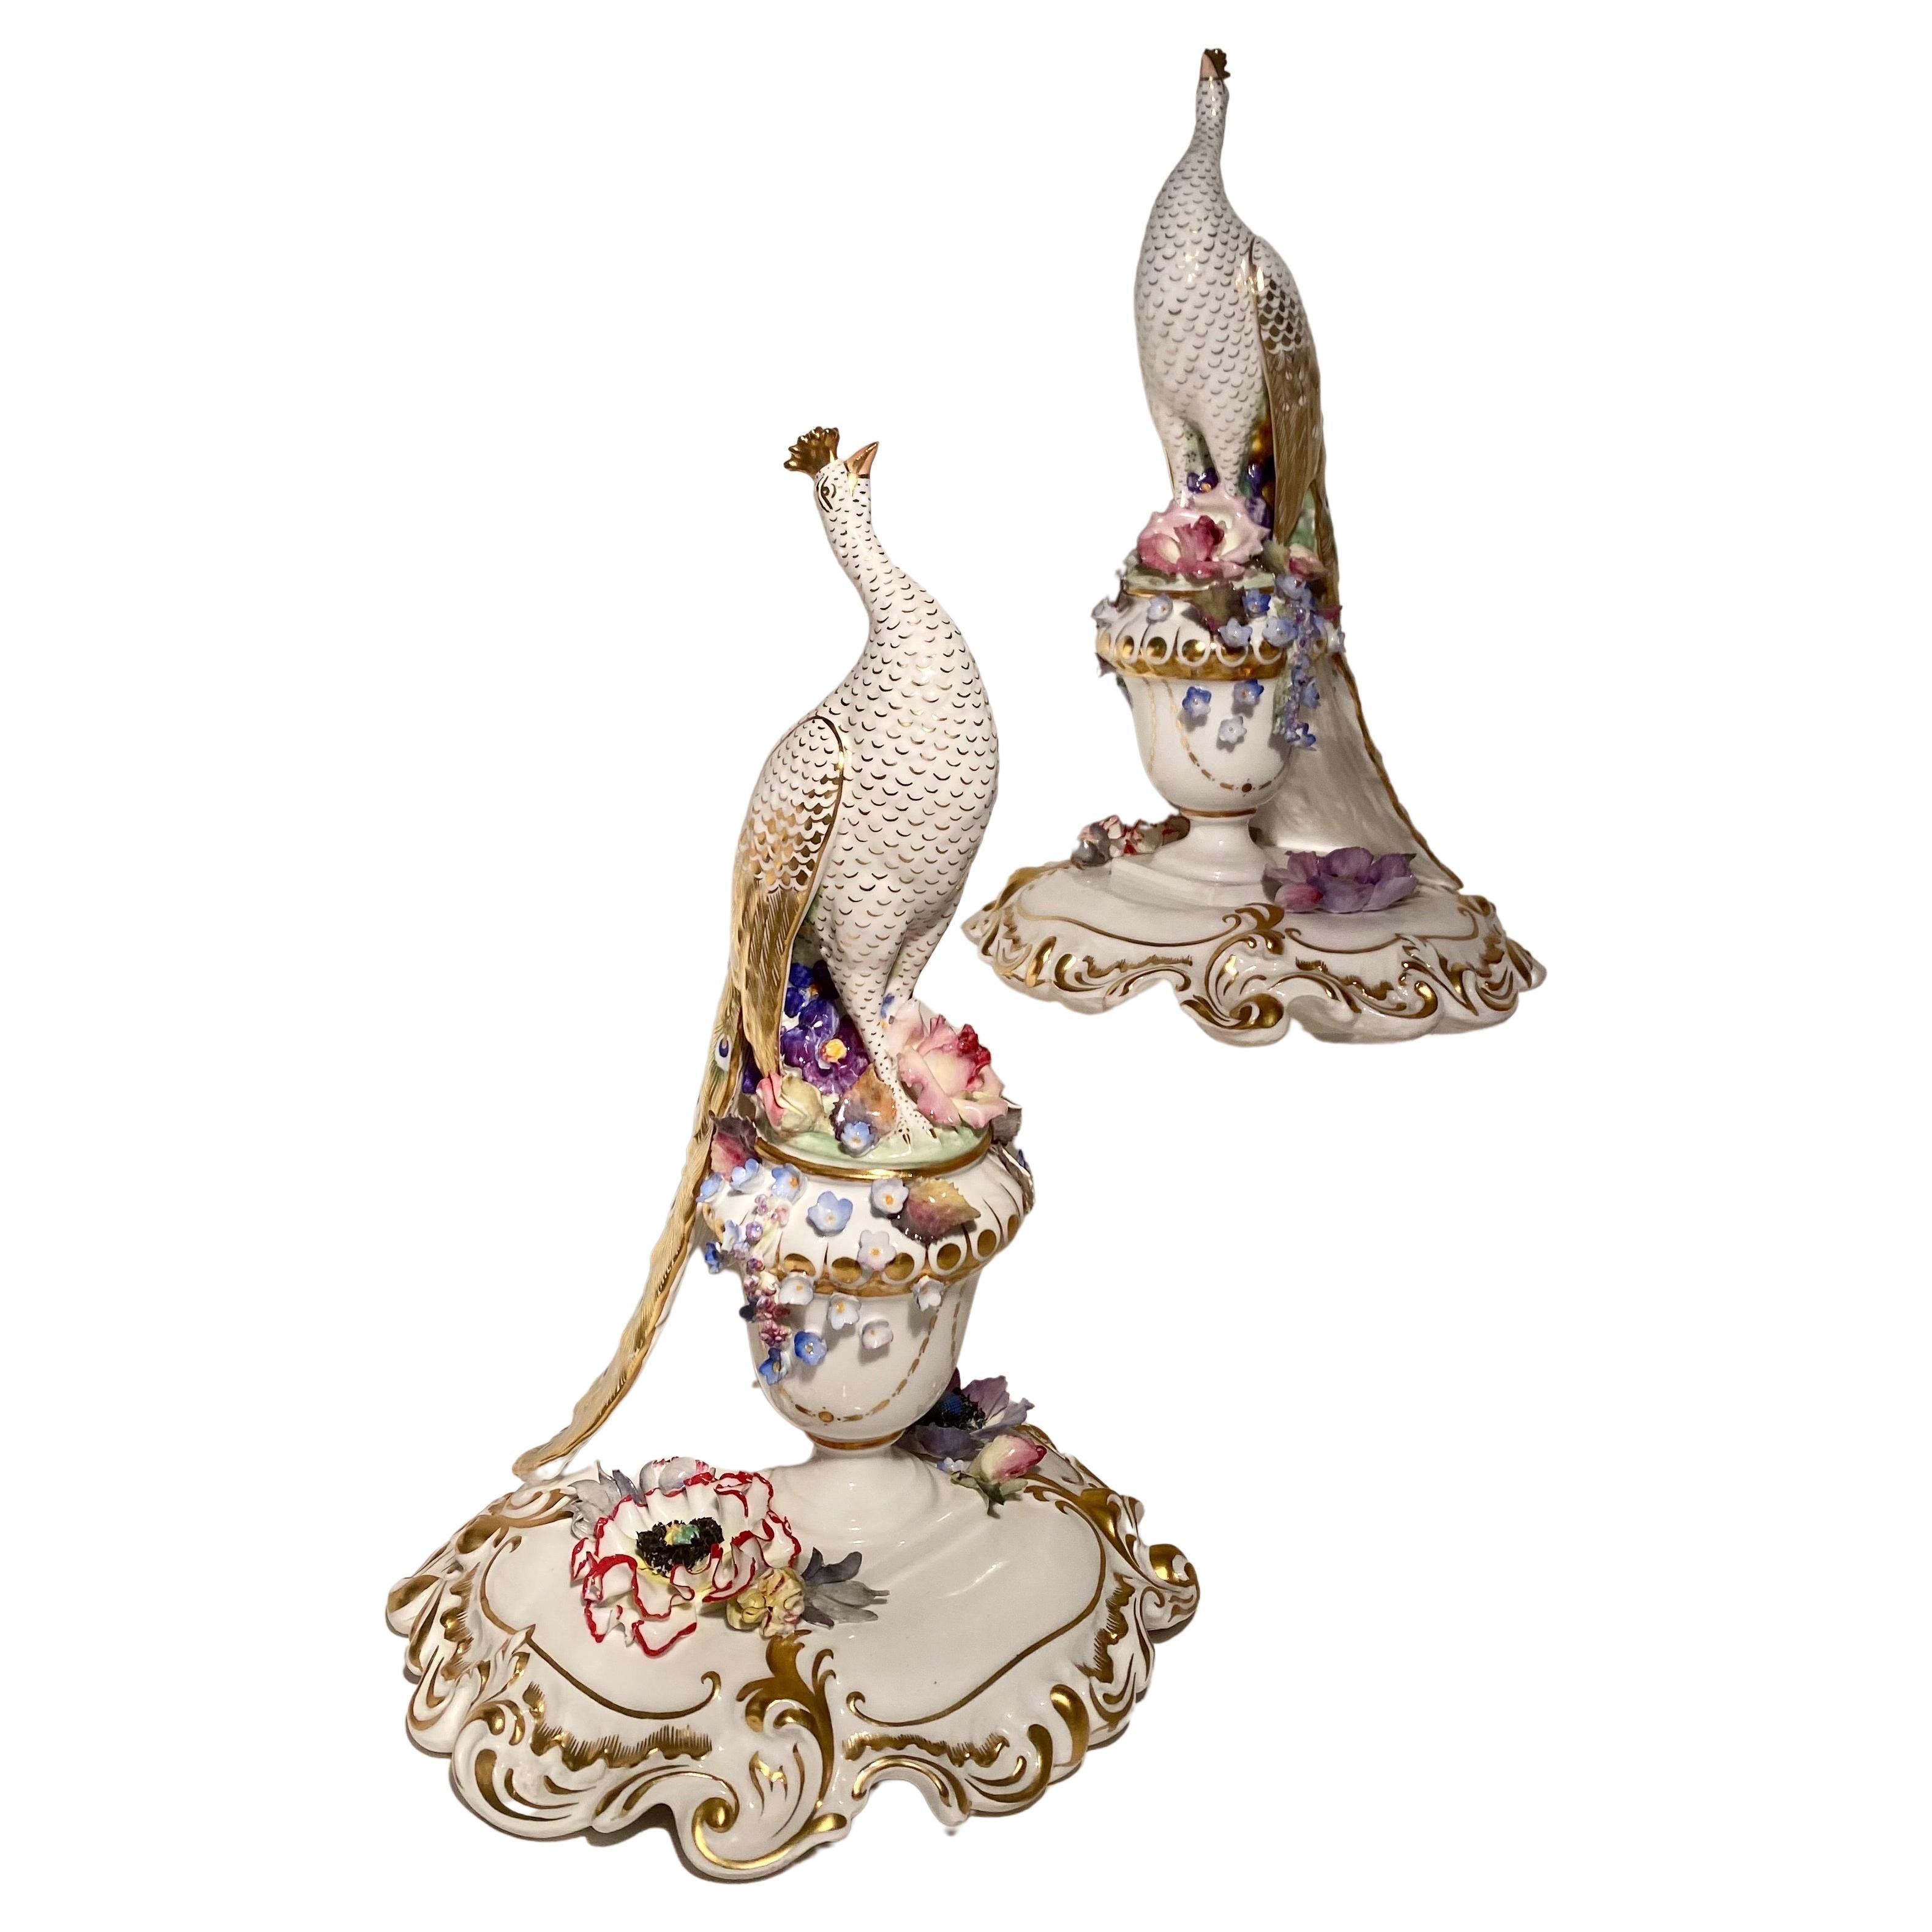 Royal Crown Derby Porcelain Figure, Modelled as a Peacock For Sale 7